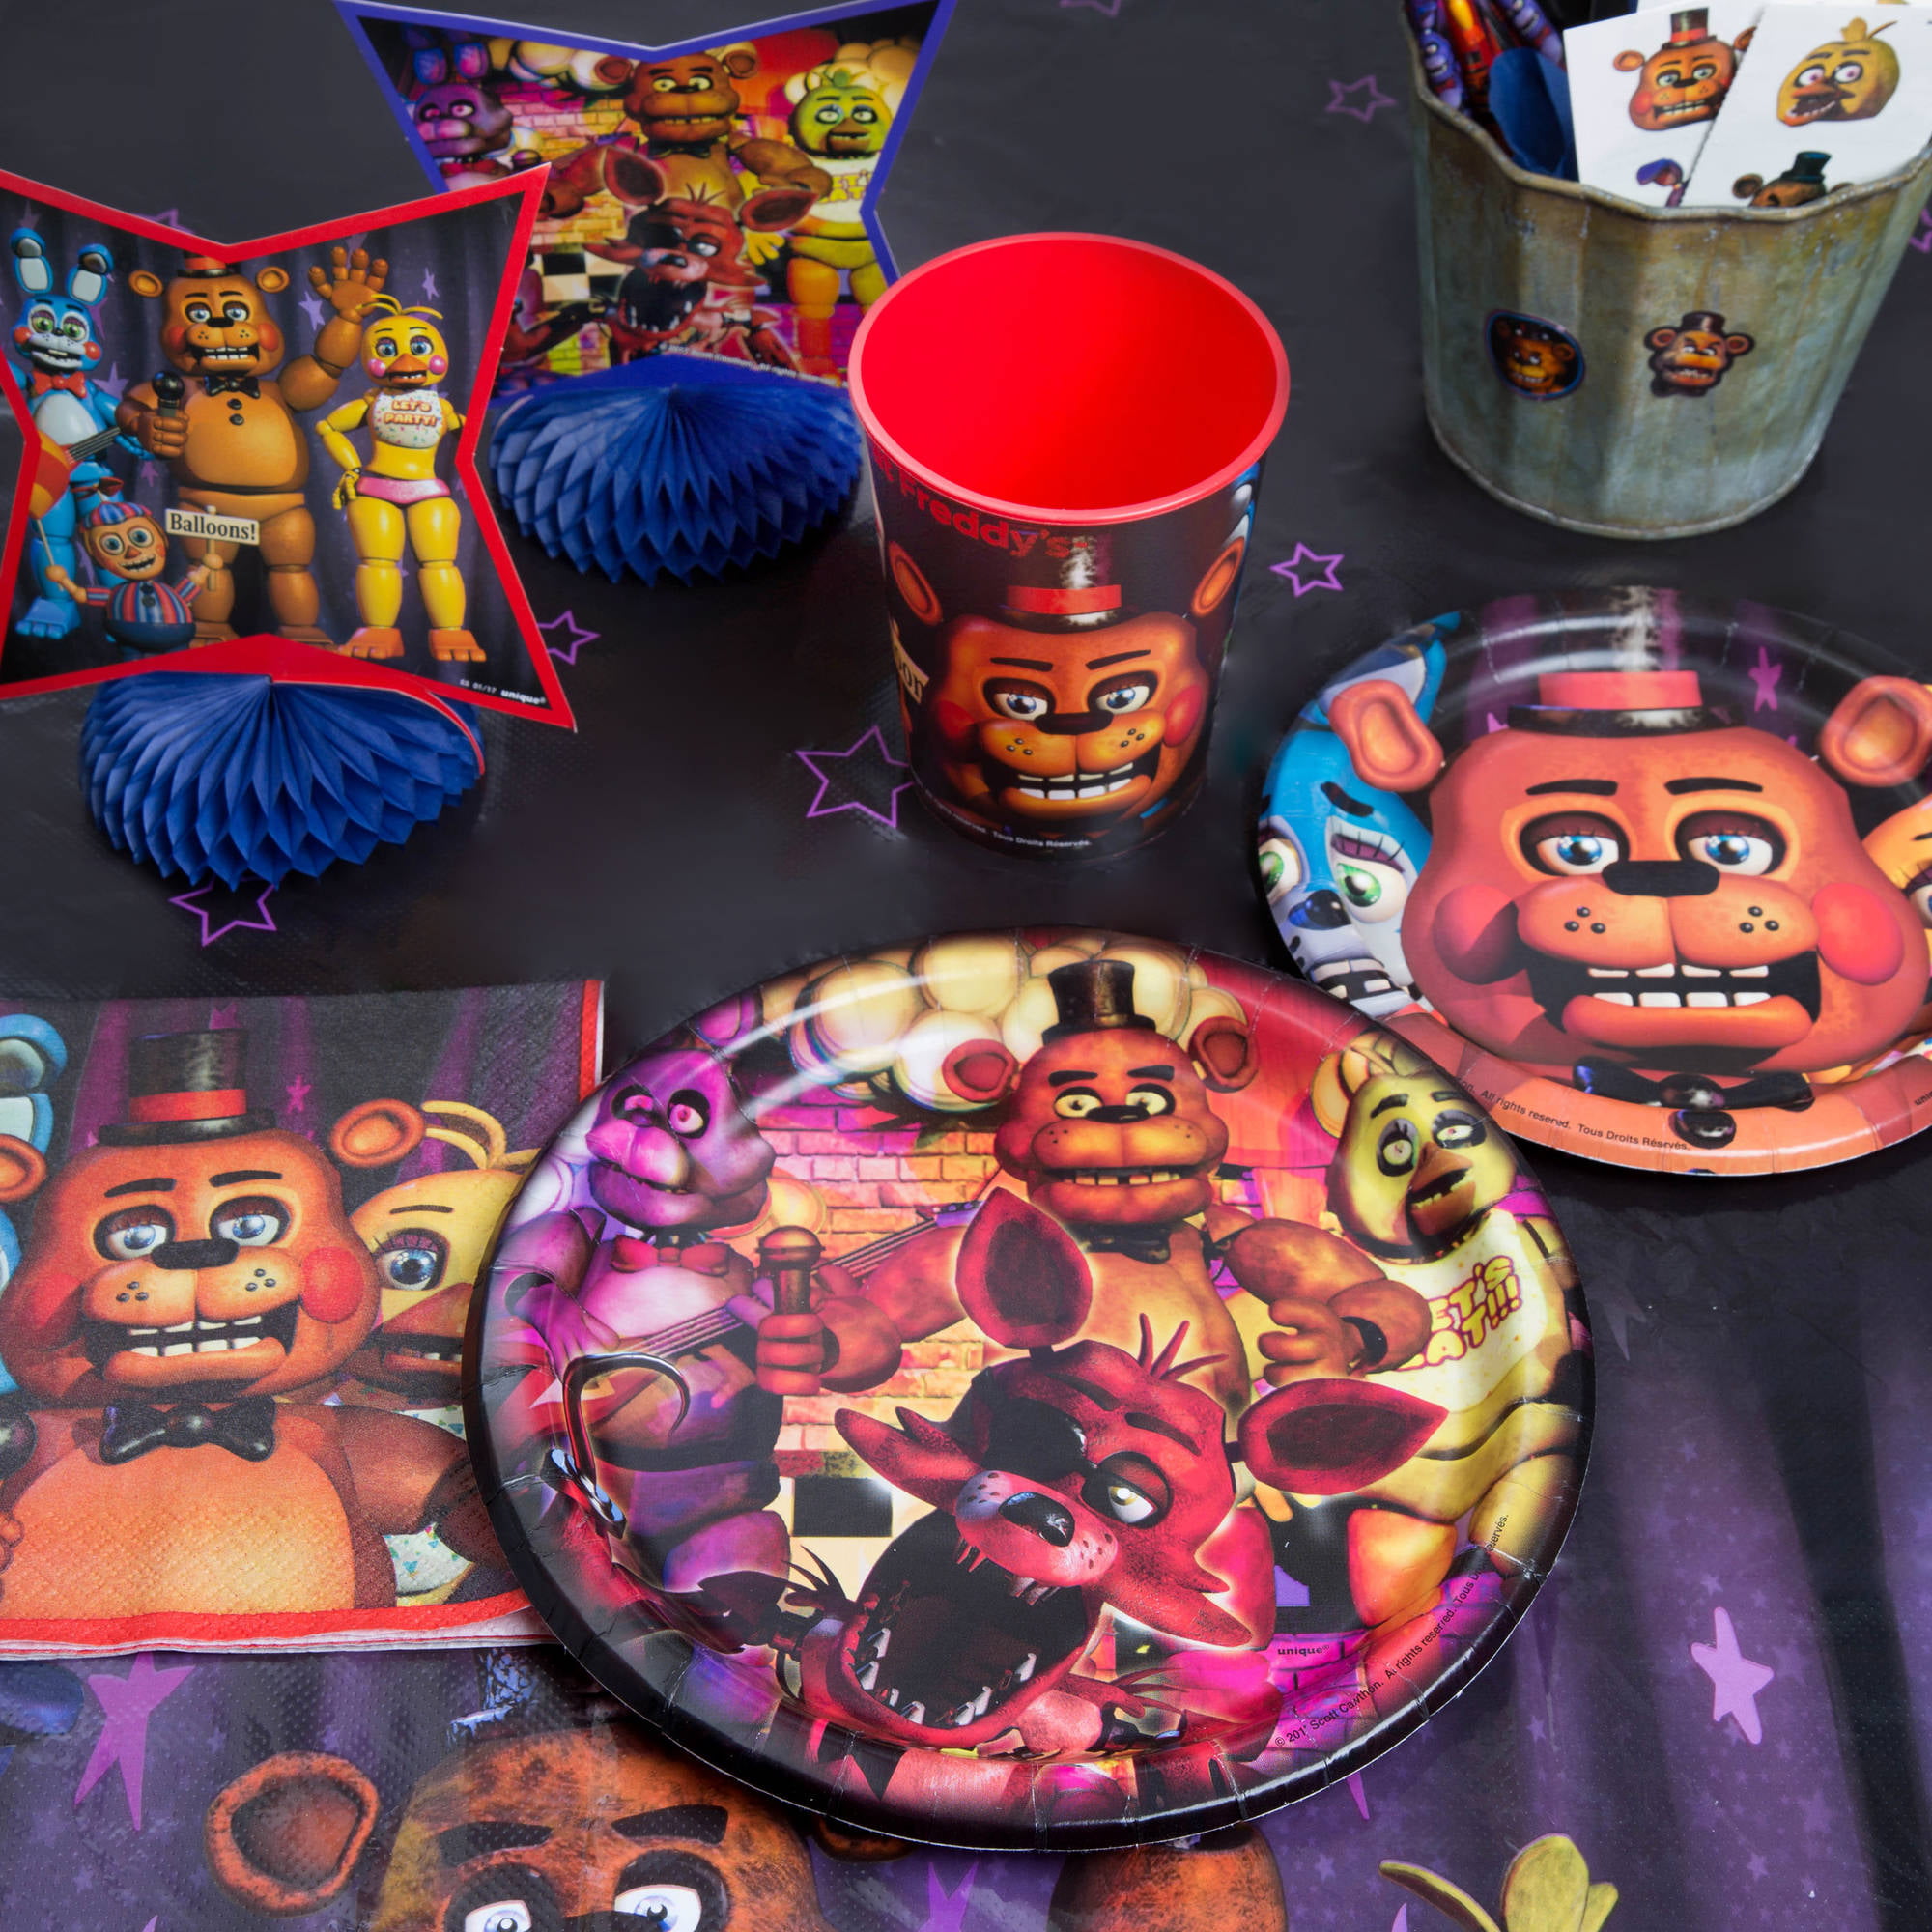 100 Five nights at Freddy's party ideas  five nights at freddy's, five  night, freddy